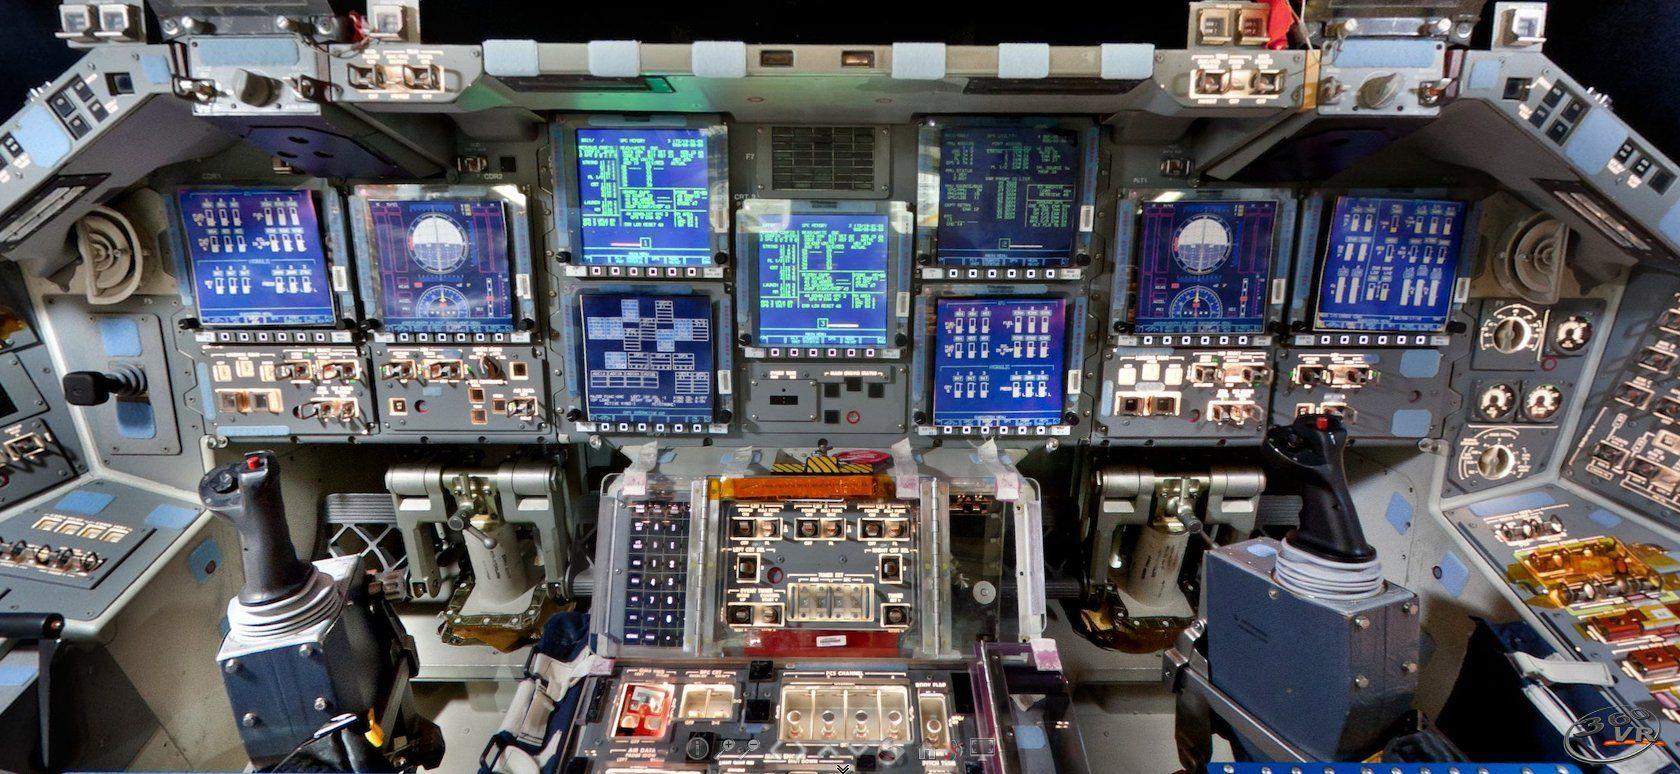 image of Interior Space Shuttle Background - #SpaceHero